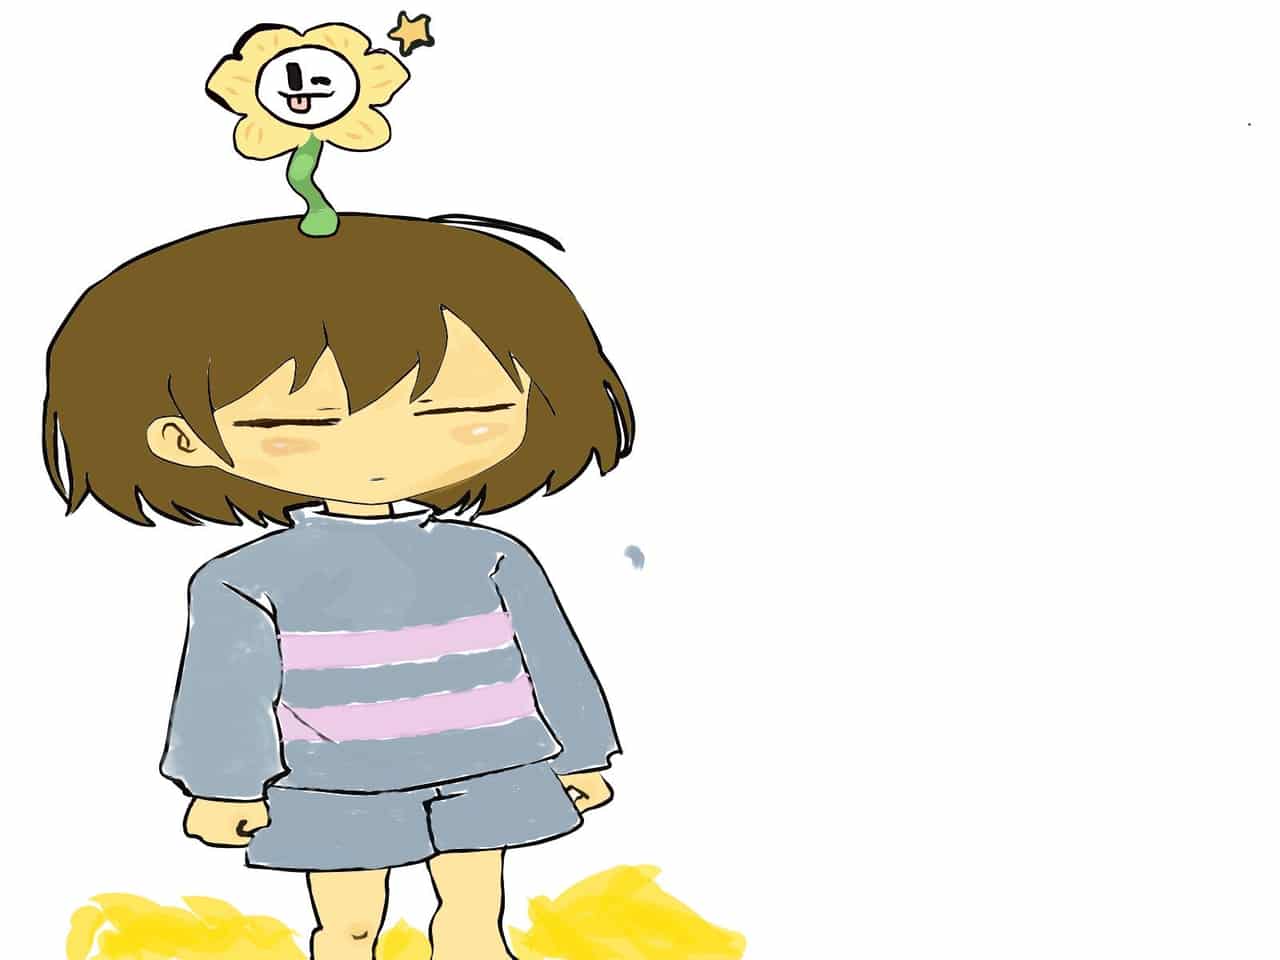 arlene pedrosa recommends Pictures Of Frisk From Undertale